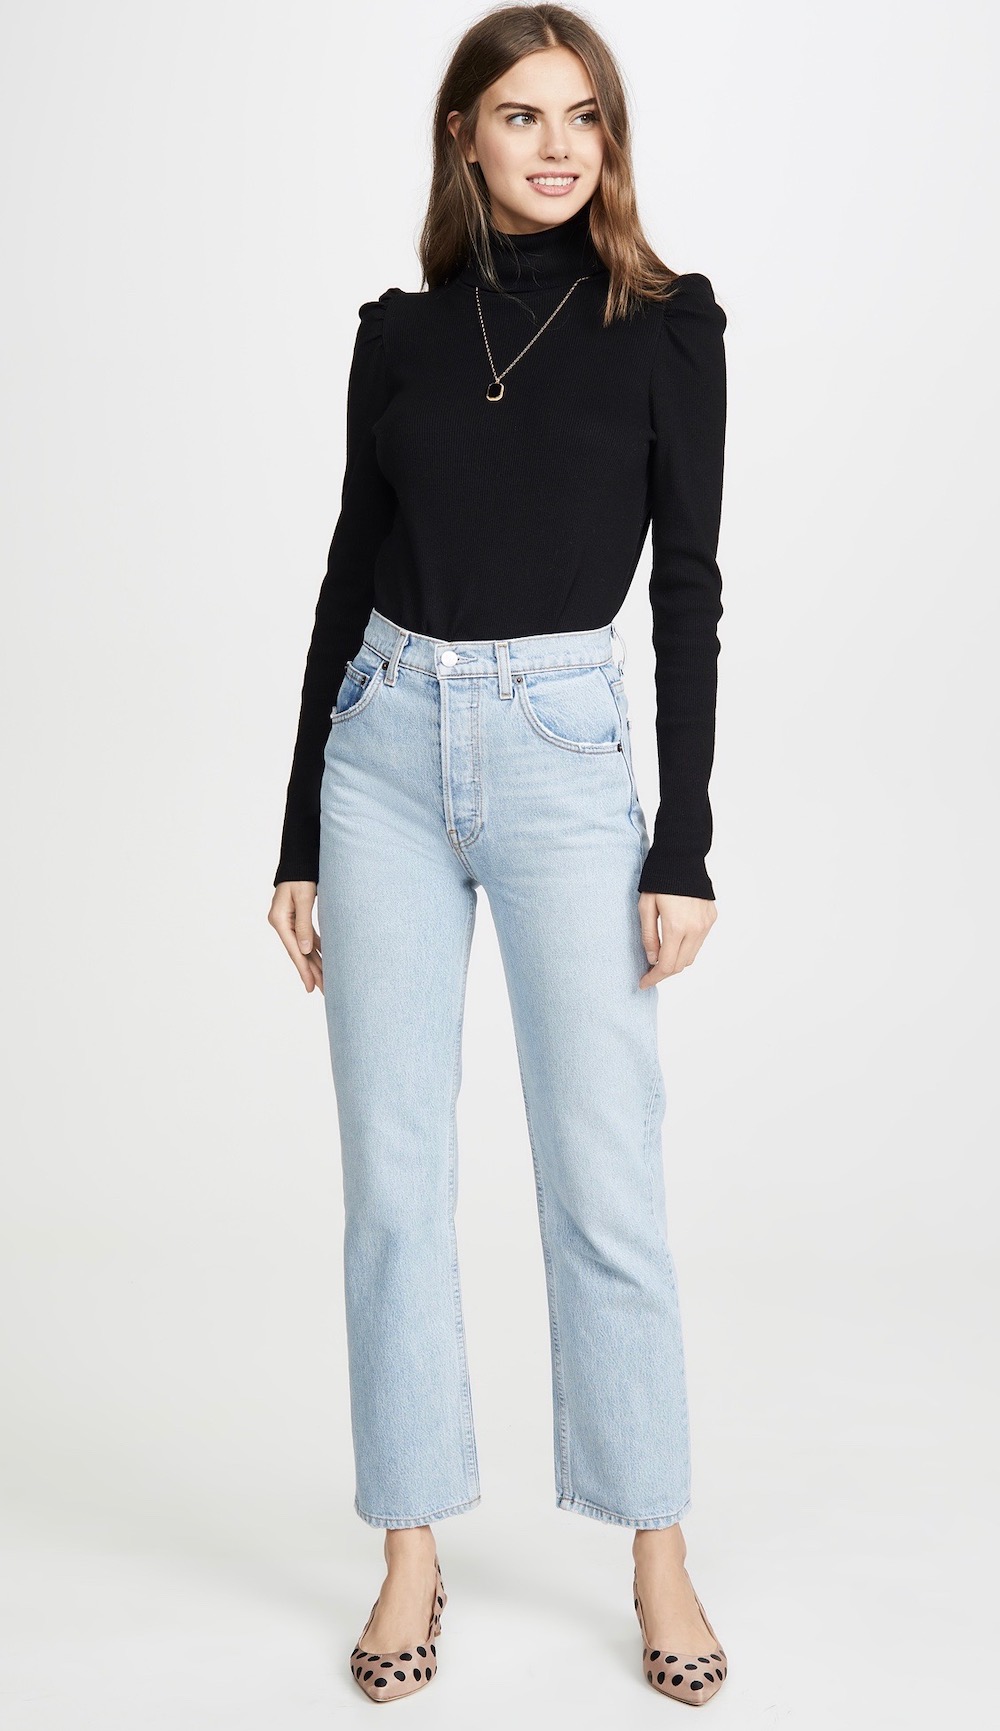 Light-Wash Jeans for Summer 2020 - theFashionSpot